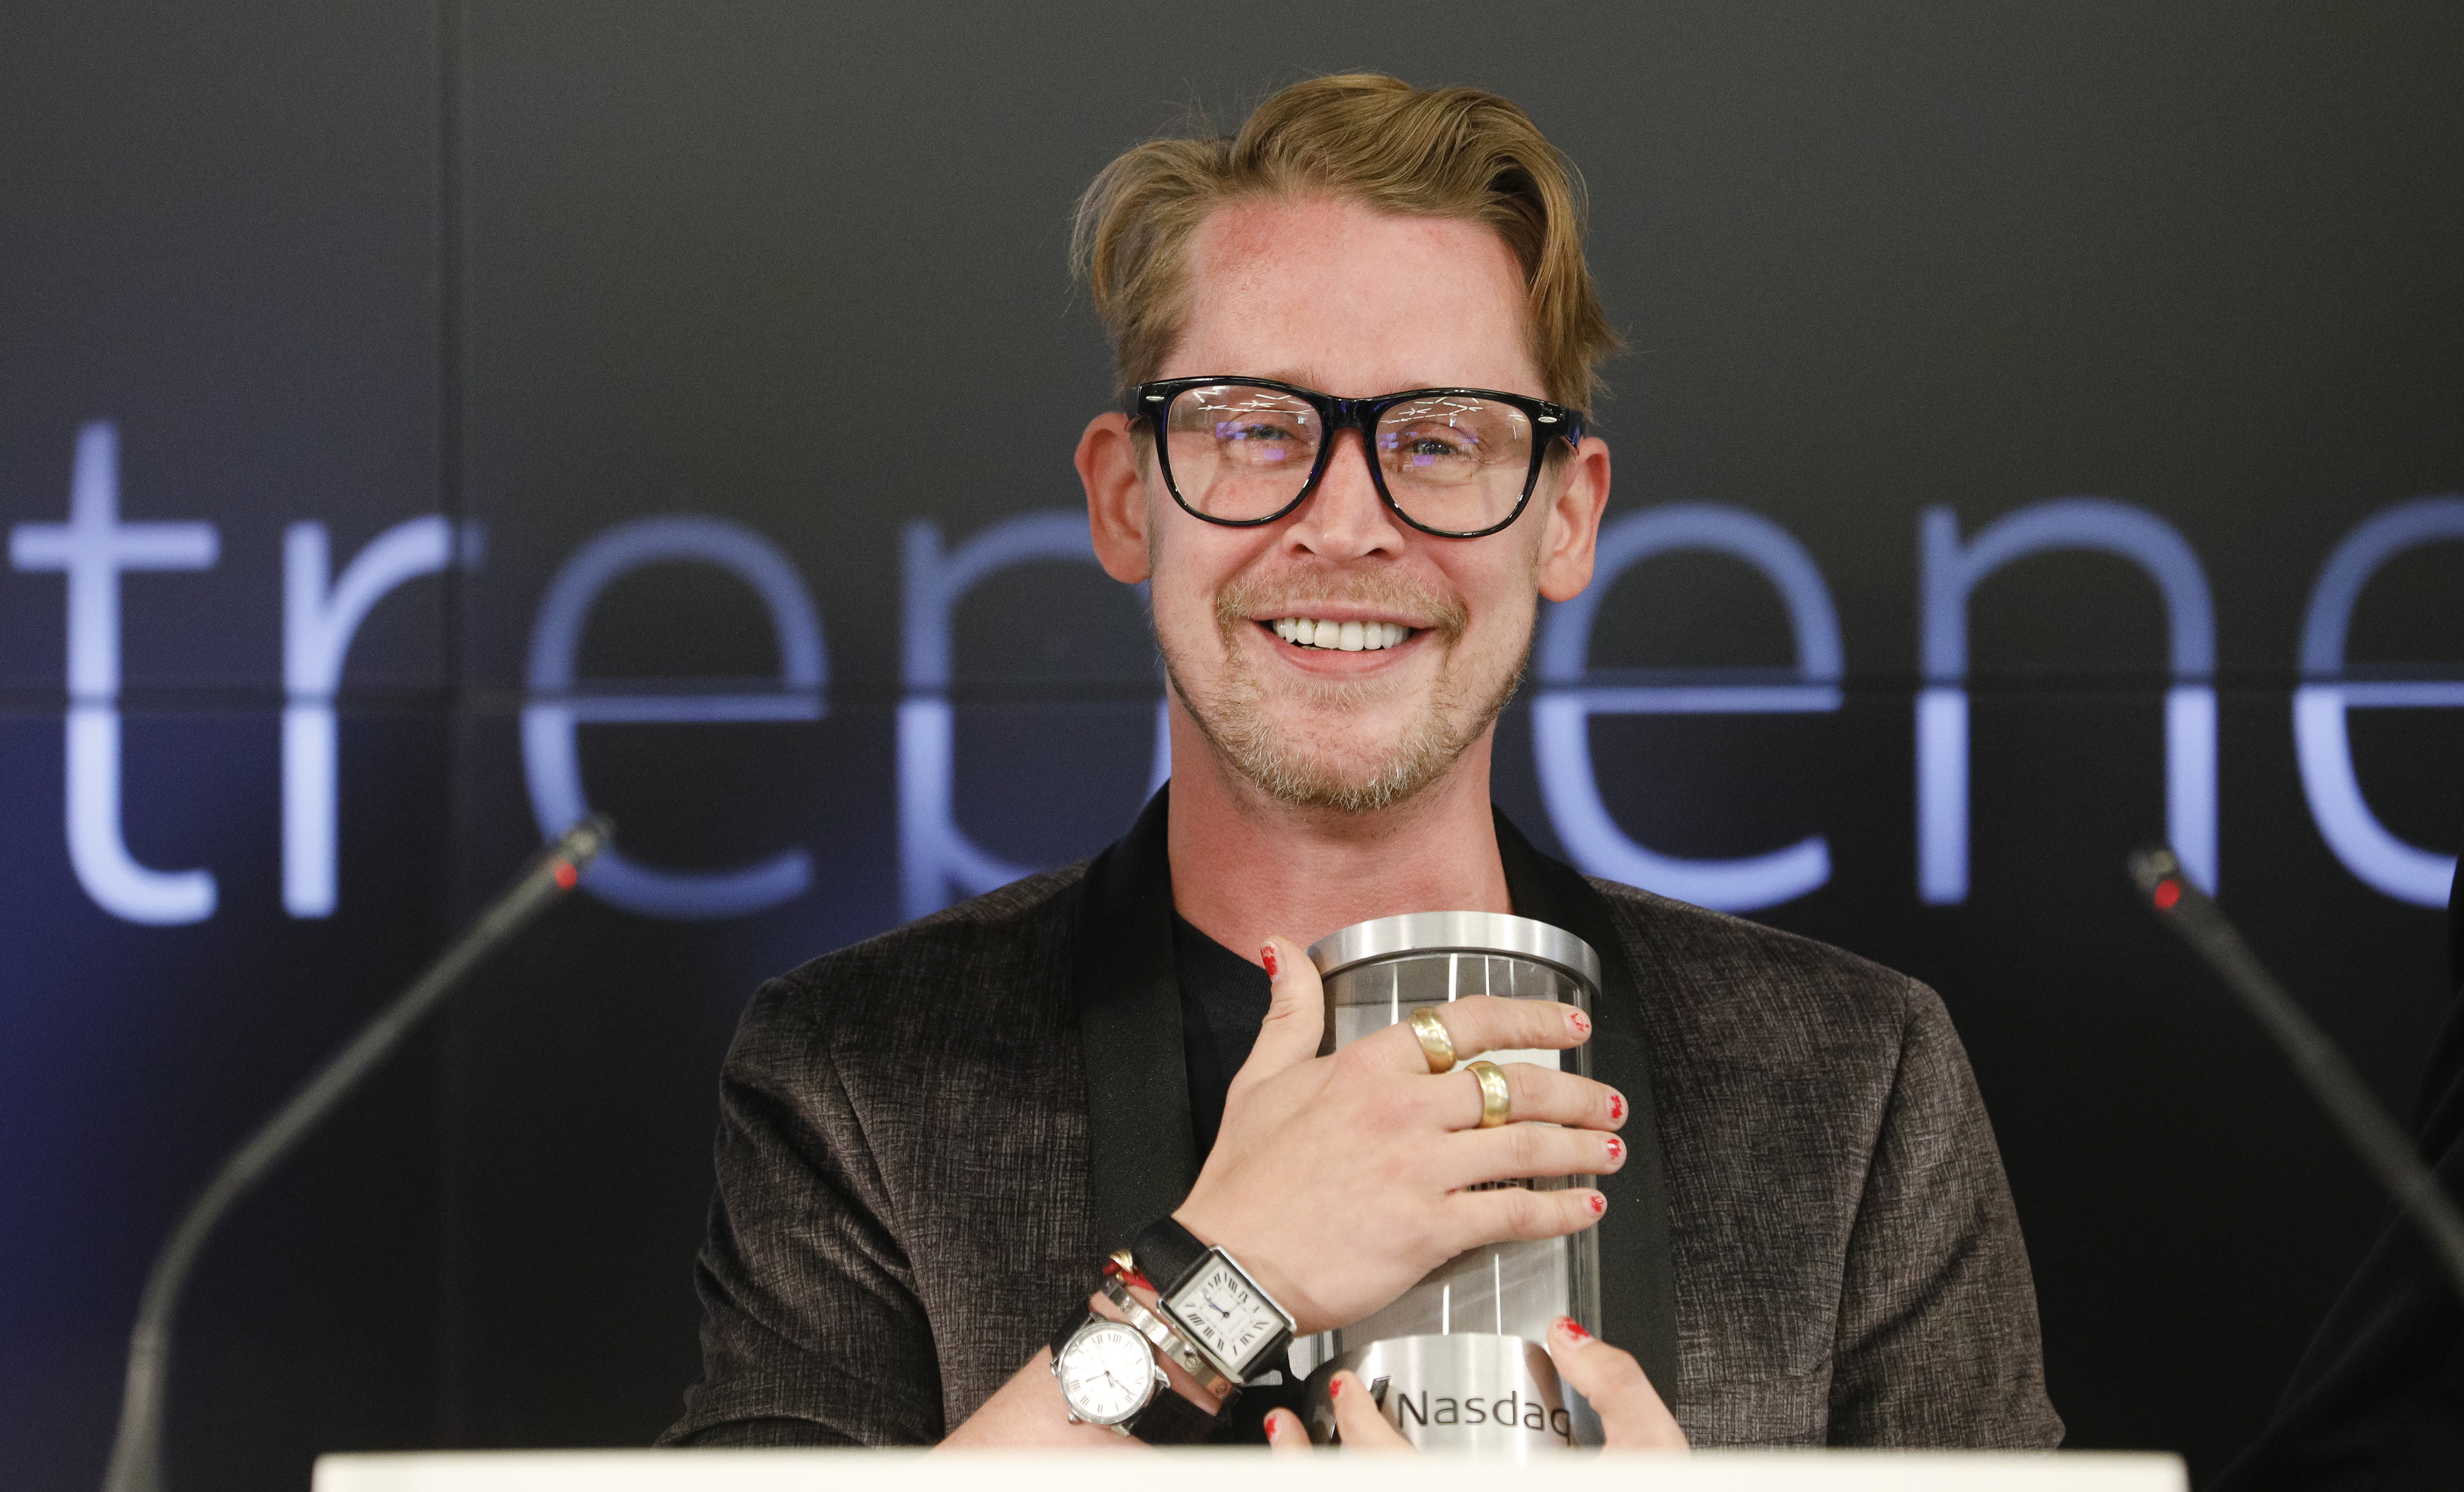 Macaulay Culkin as the honorary bell ringer of the Nasdaq Closing Bell on August 6, 2019, in San Francisco, California | Source: Getty Images